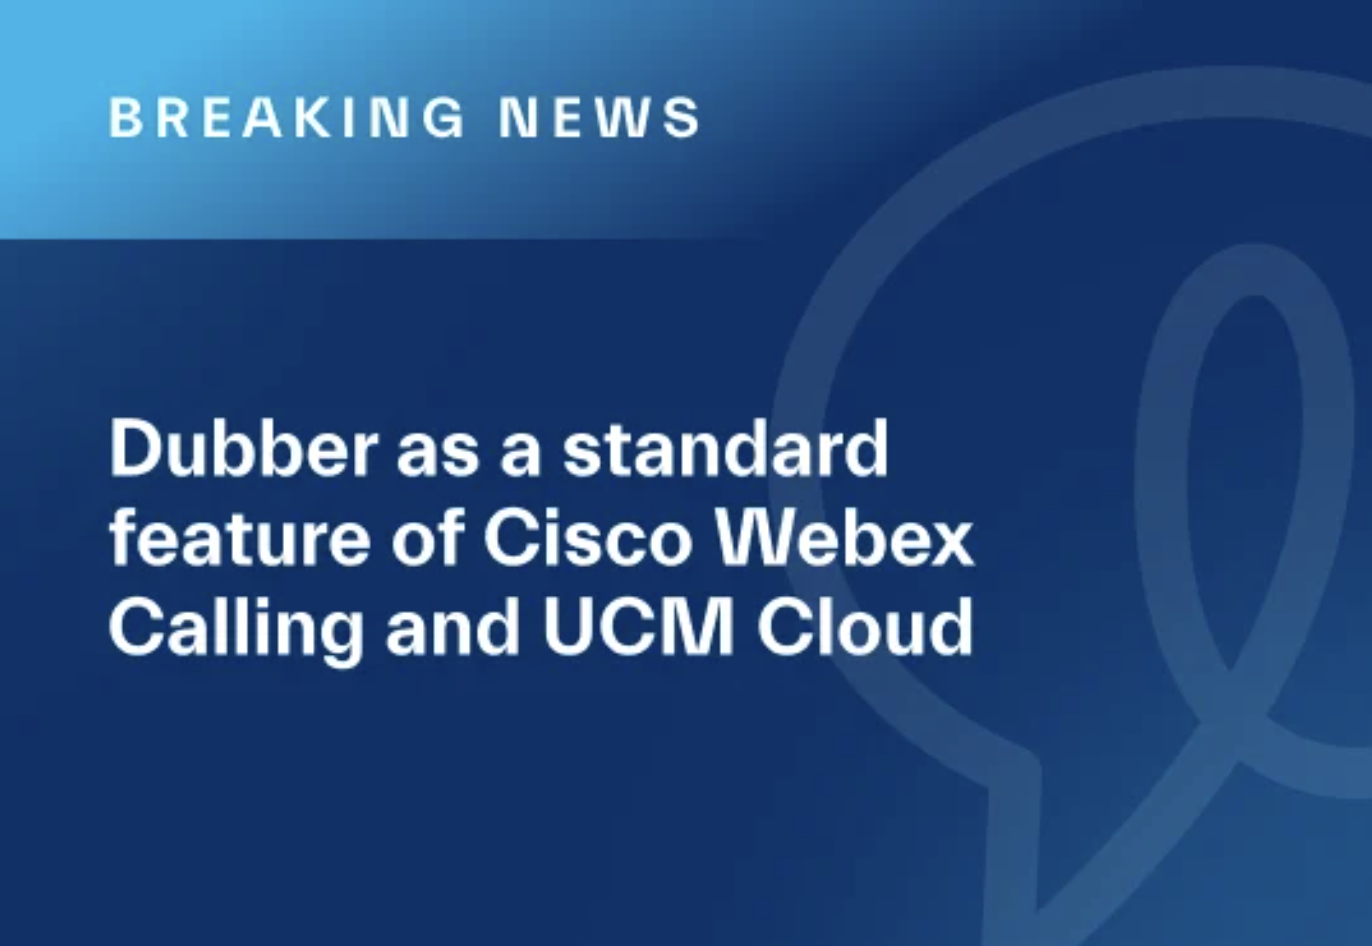 Dubber now a standard feature of Cisco Webex Calling and UCM Cloud